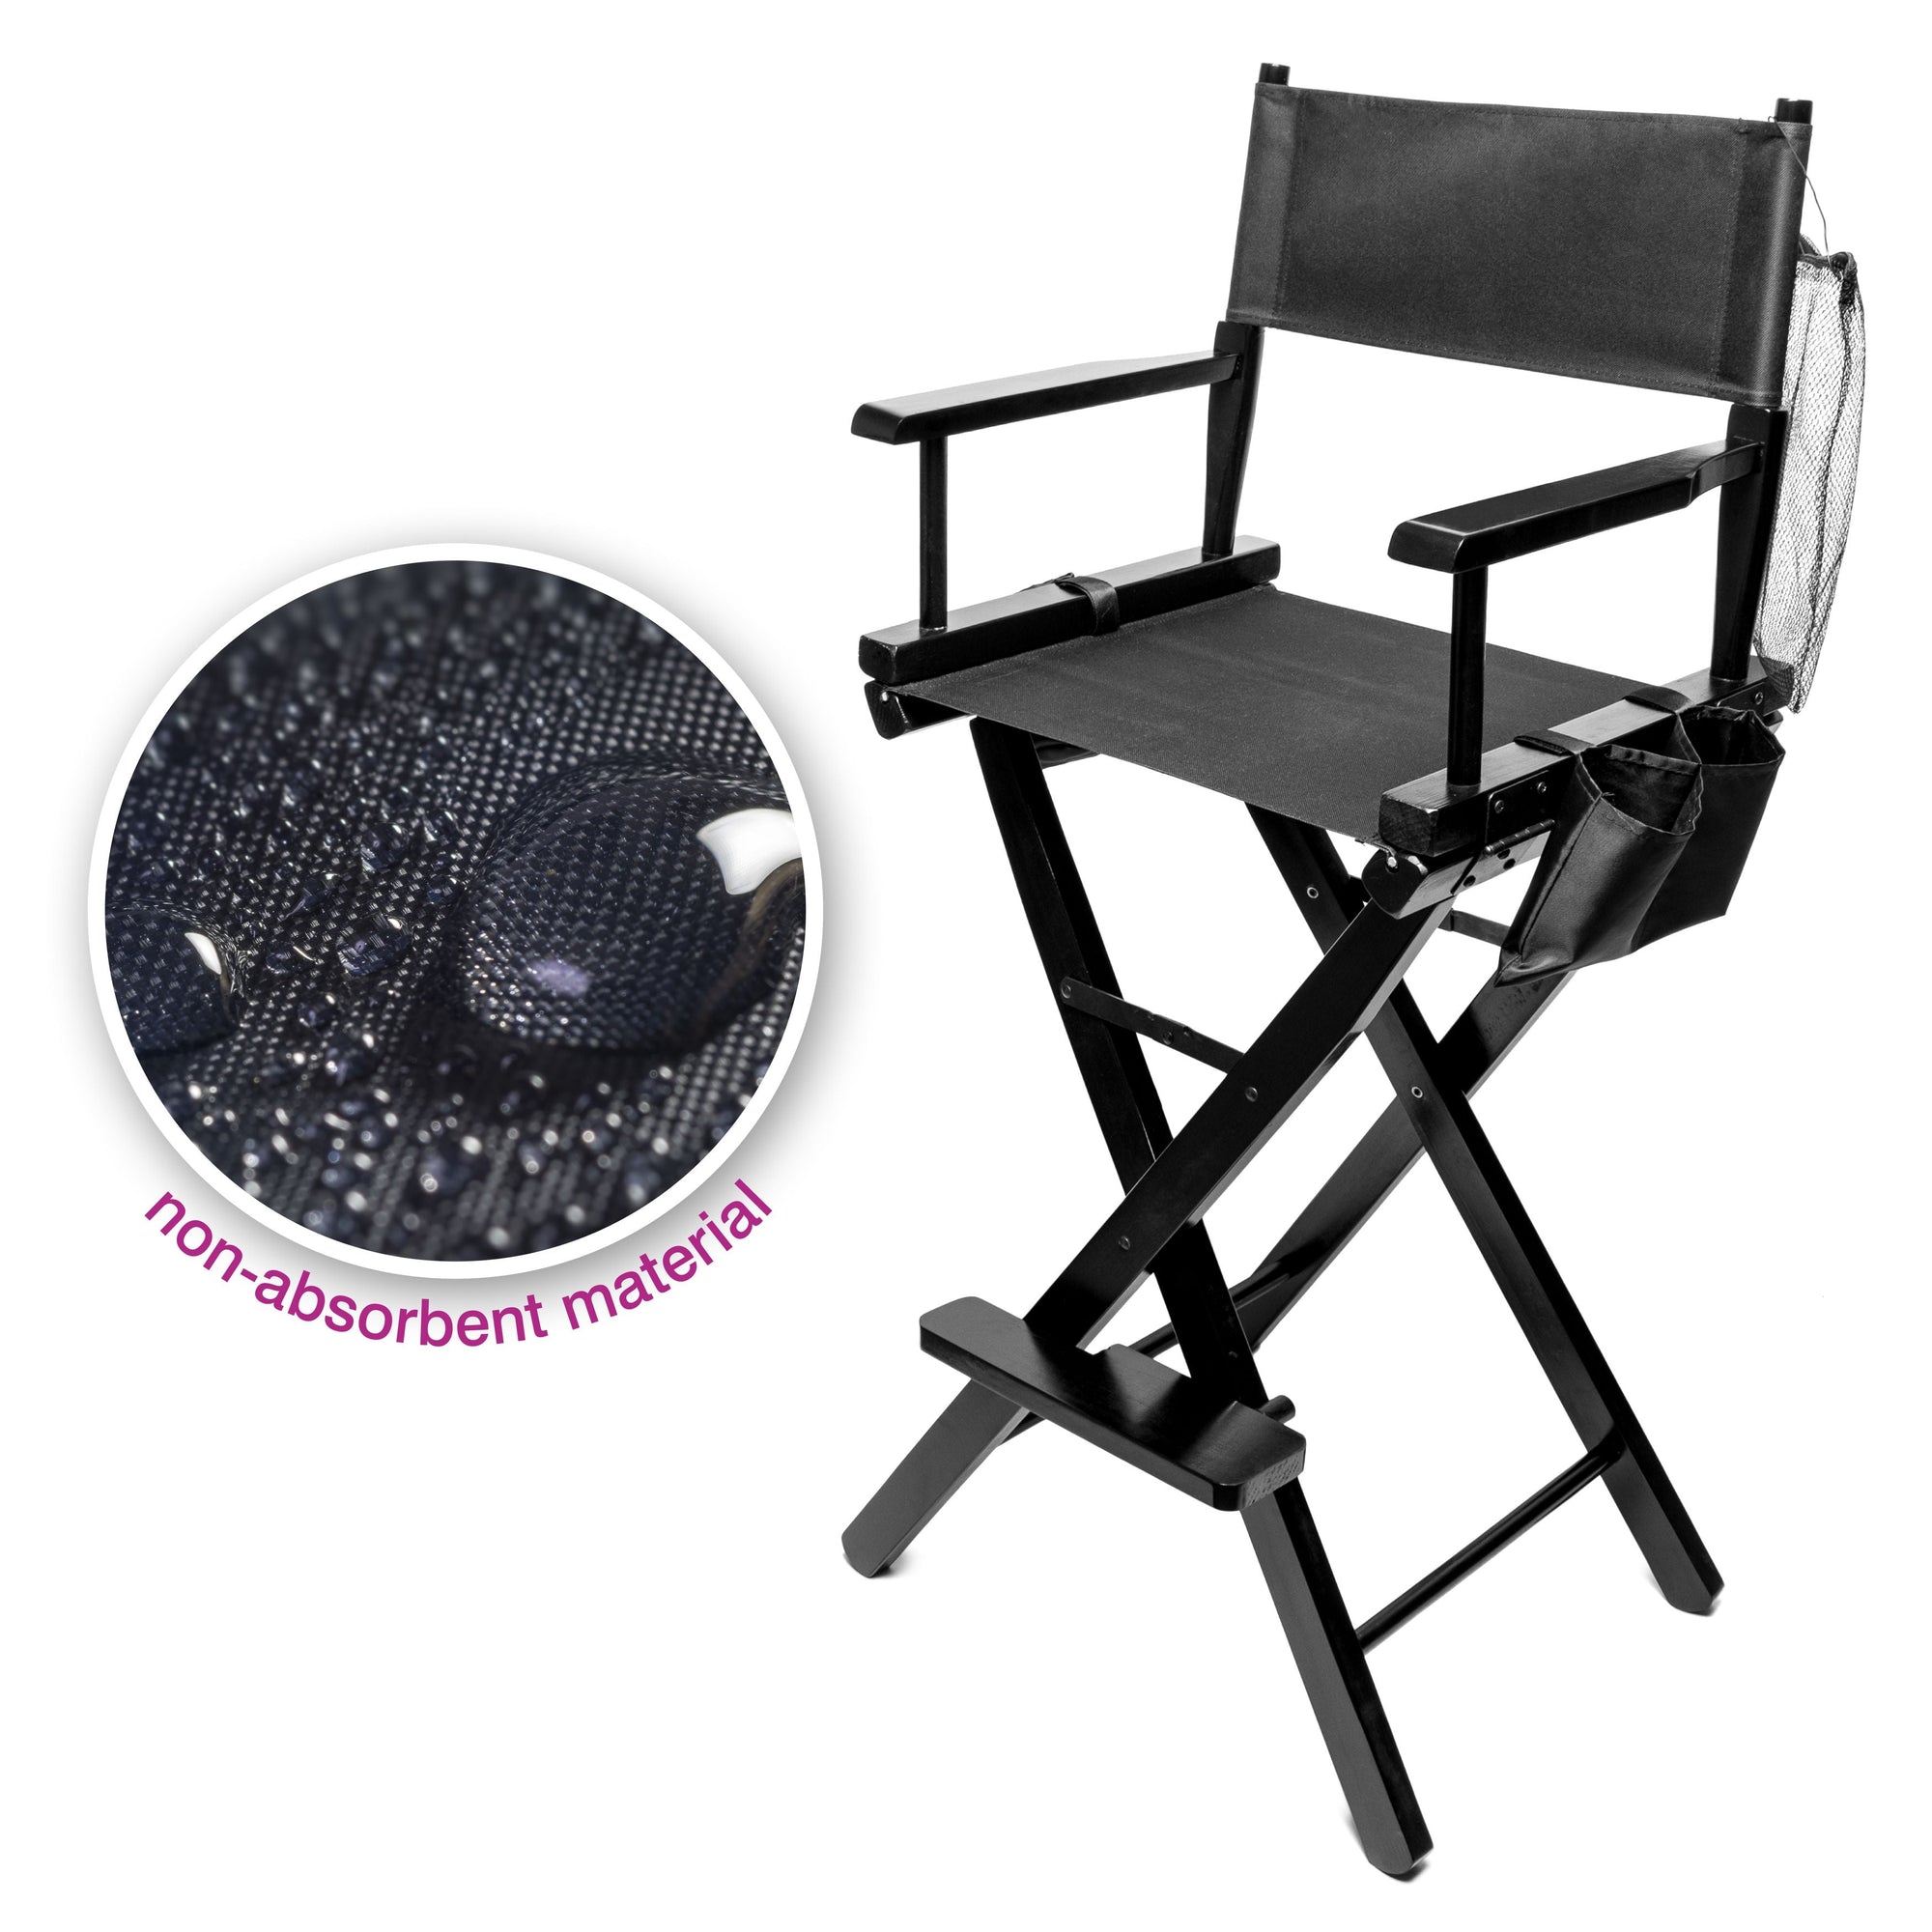 professional make up artist chair with hotspot image of close up of the woven waterproof non absorbent fabric used for the seat and backrest on chair